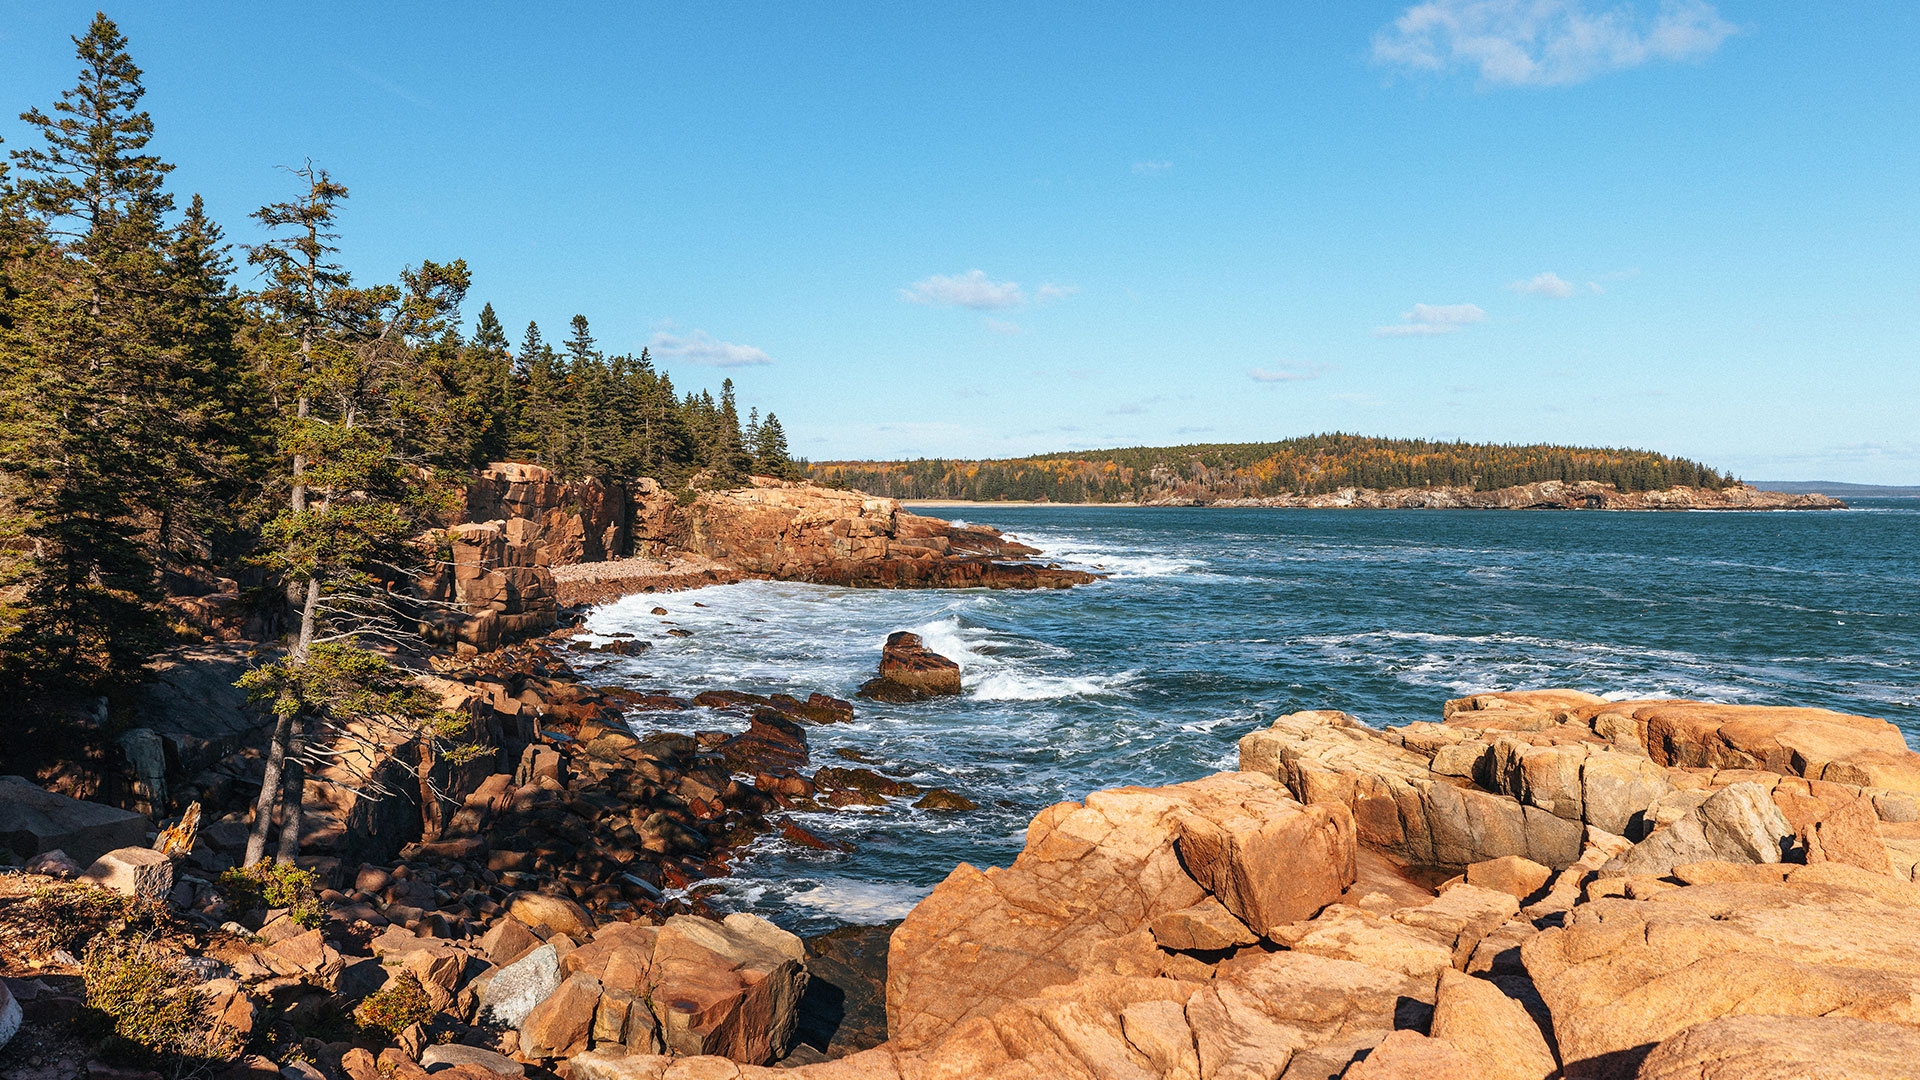 Acadia National Park, Best places to take photos, Photo guide, Travels, 1920x1080 Full HD Desktop